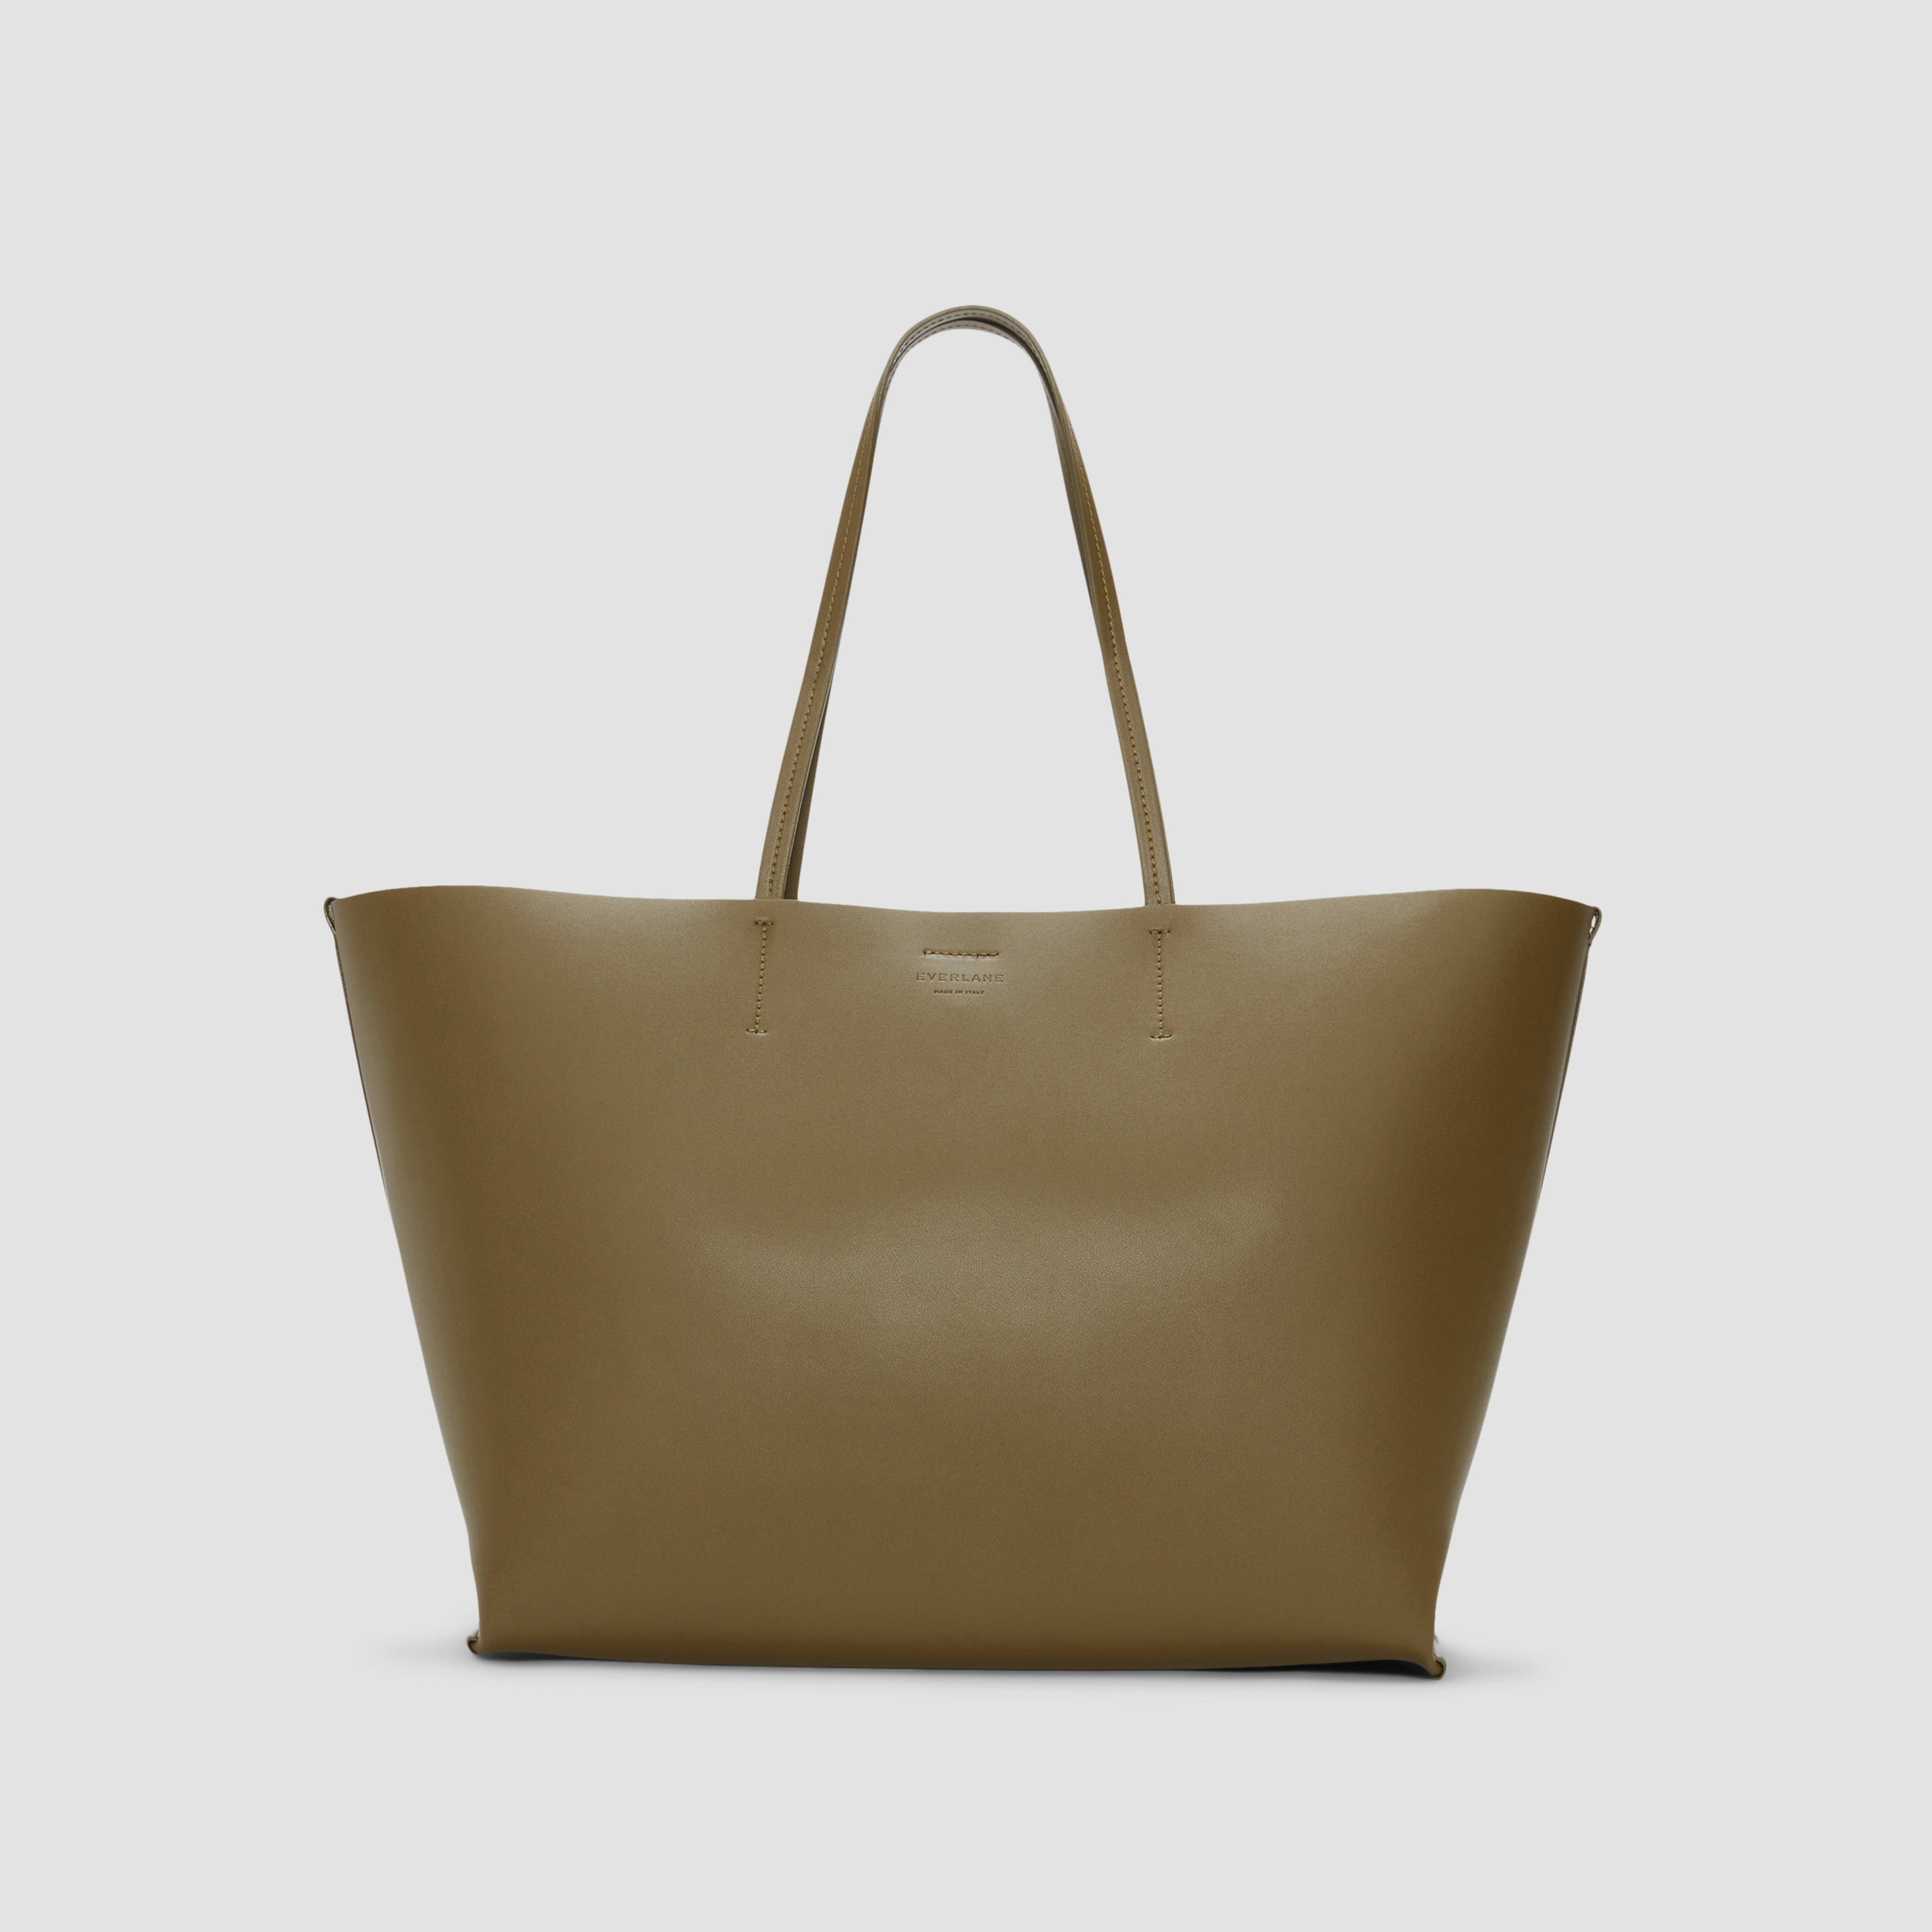 women's luxe italian leather tote bag by everlane in olive